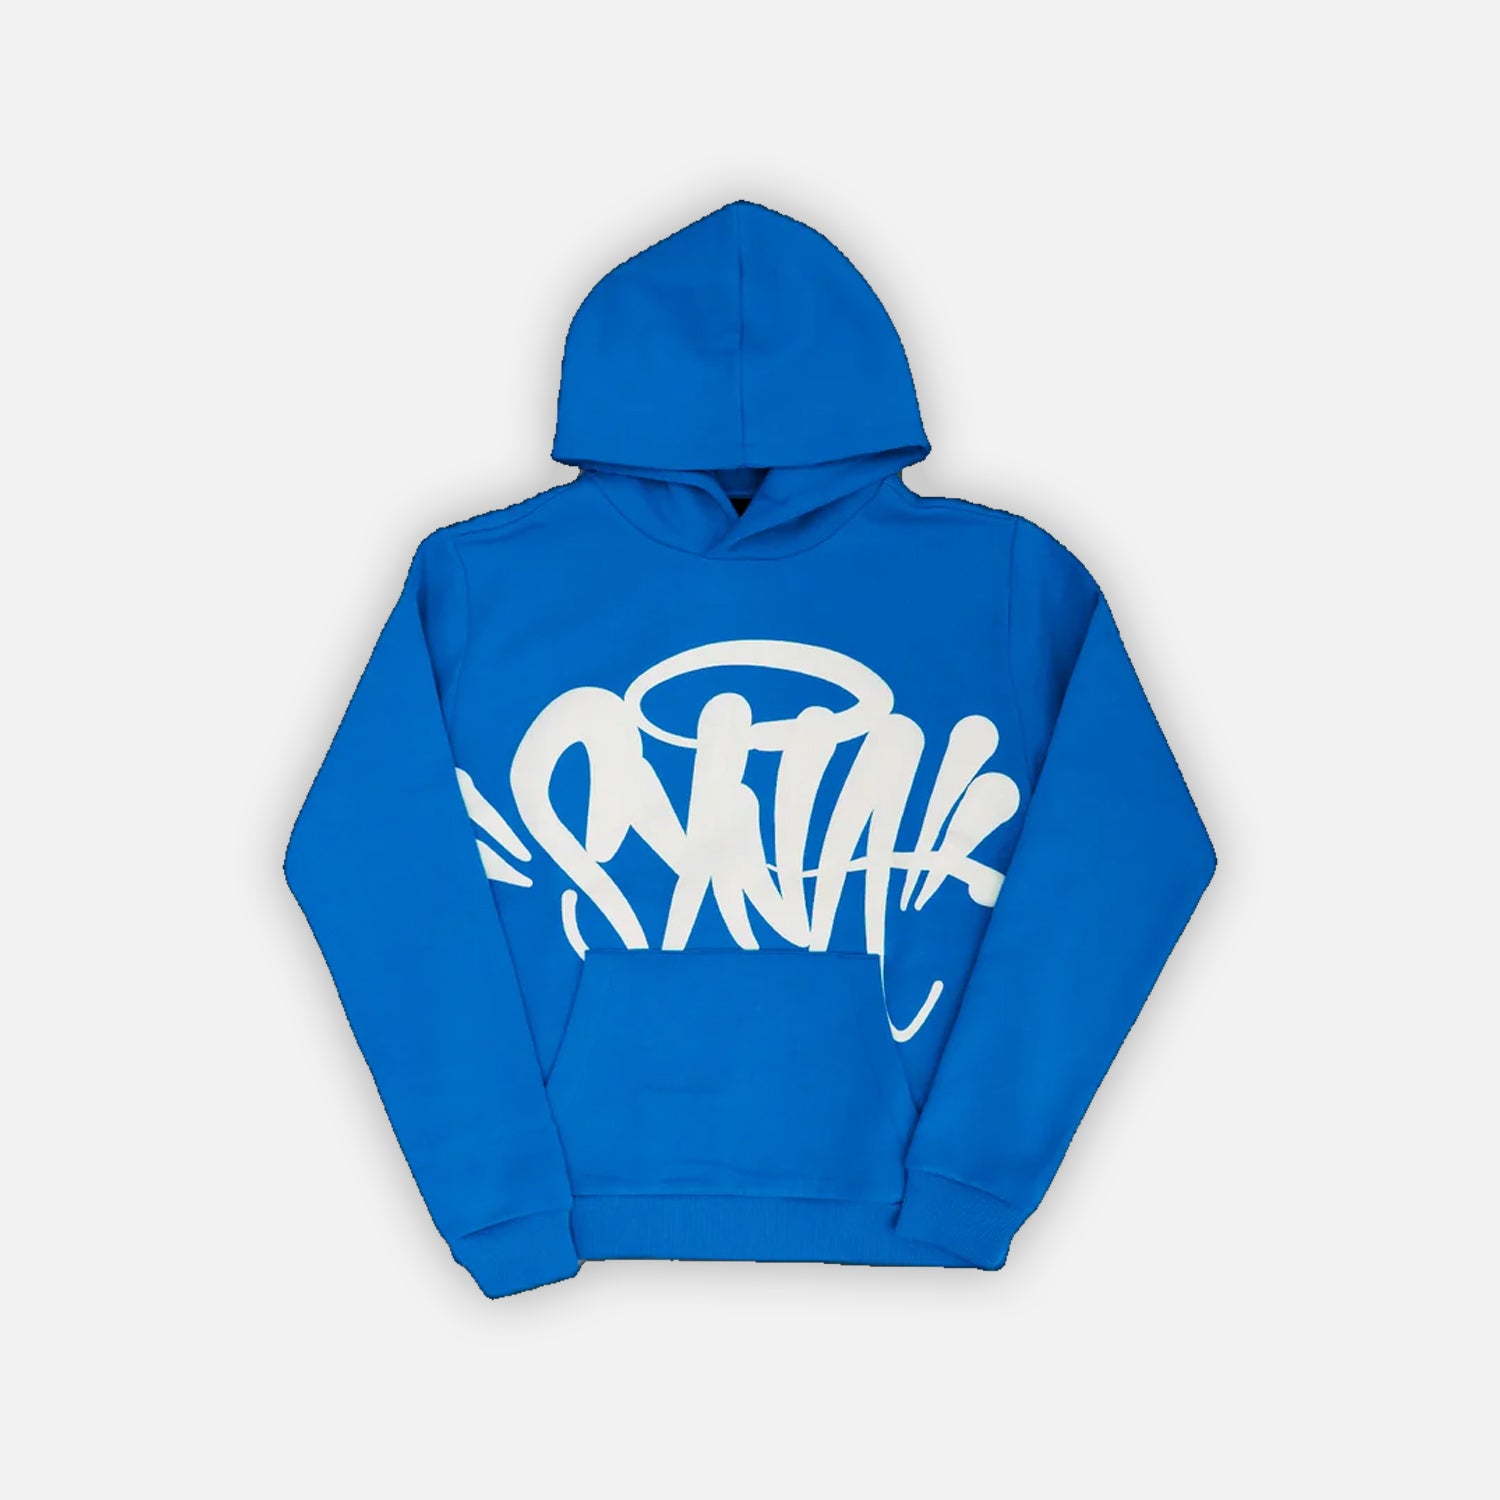 Syna World Team Hoodie + Short Twinset - Blue / White